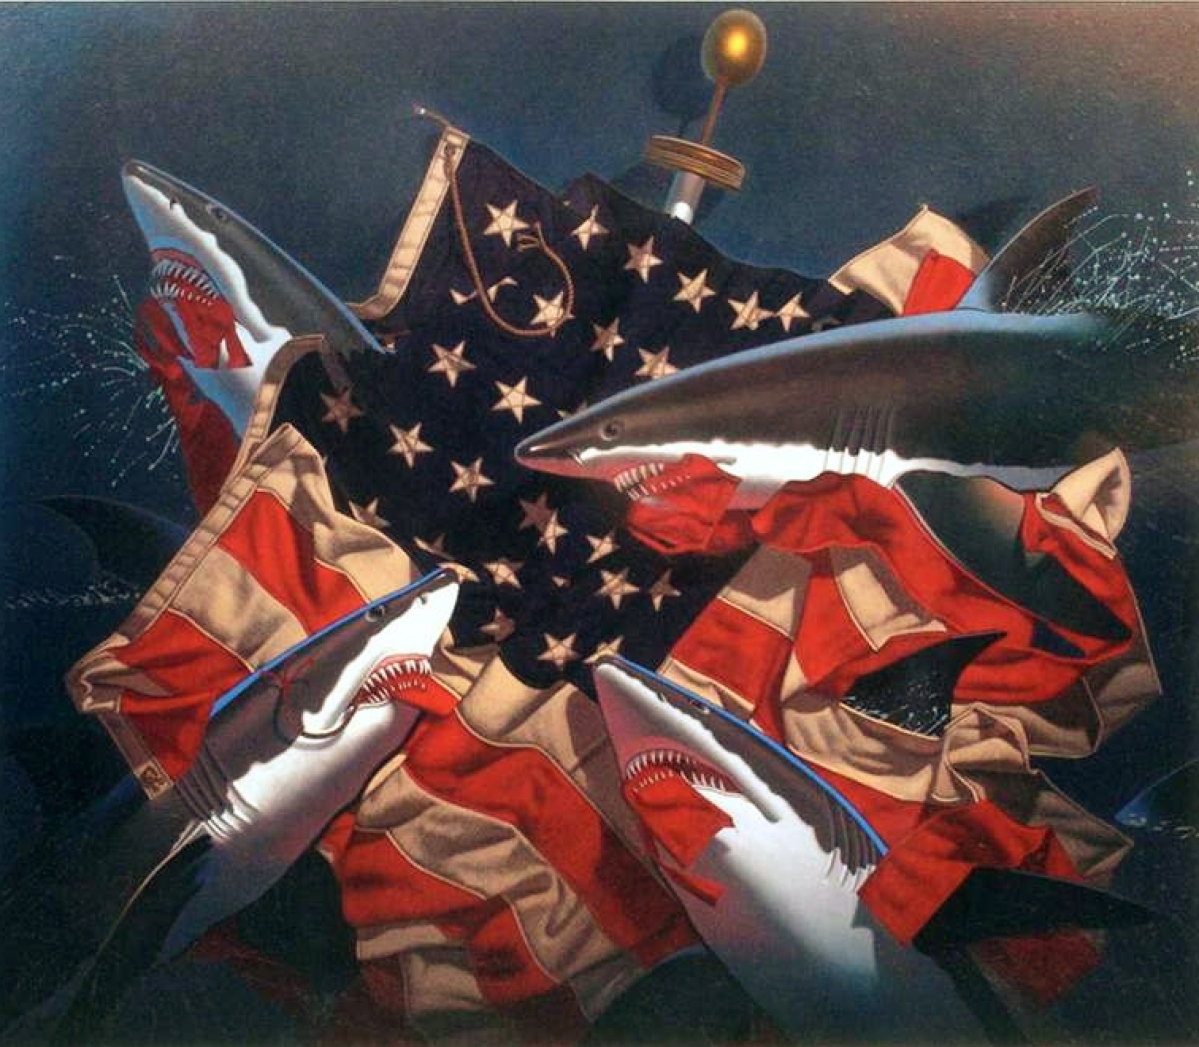 “Frenzy,” 2007, oil on canvas, 60 by 70 inches, reveals a slightly darker image of the American flag than might be expected. It is in the artist’s collection.